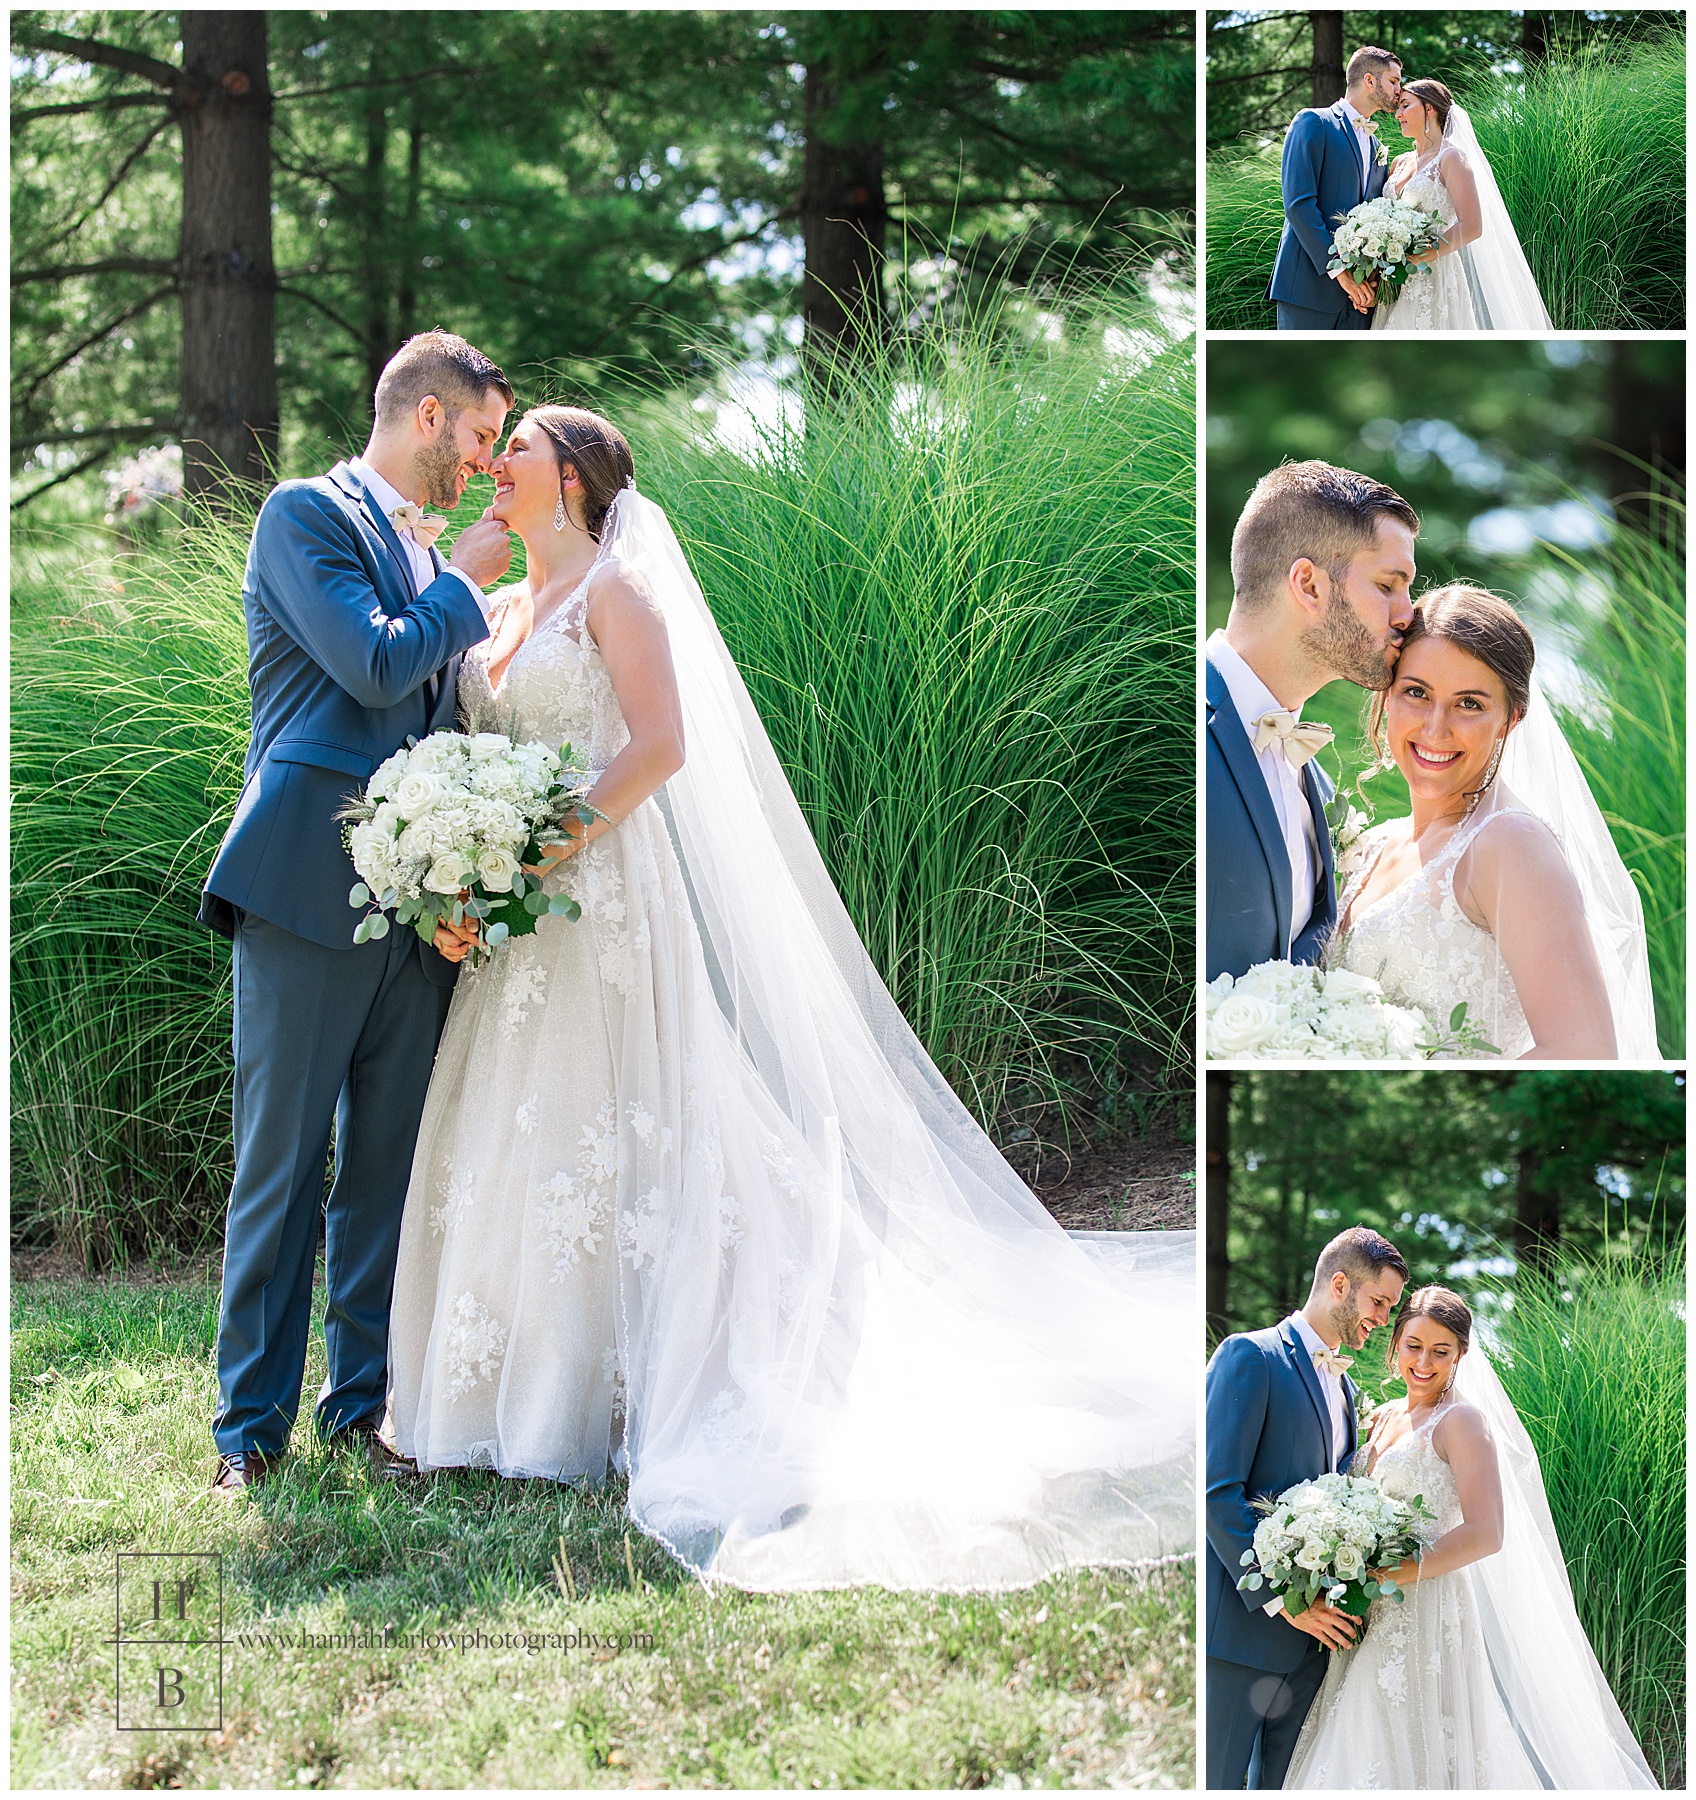 Bride and Groom Formal Photos at Oglebay with Green Grass